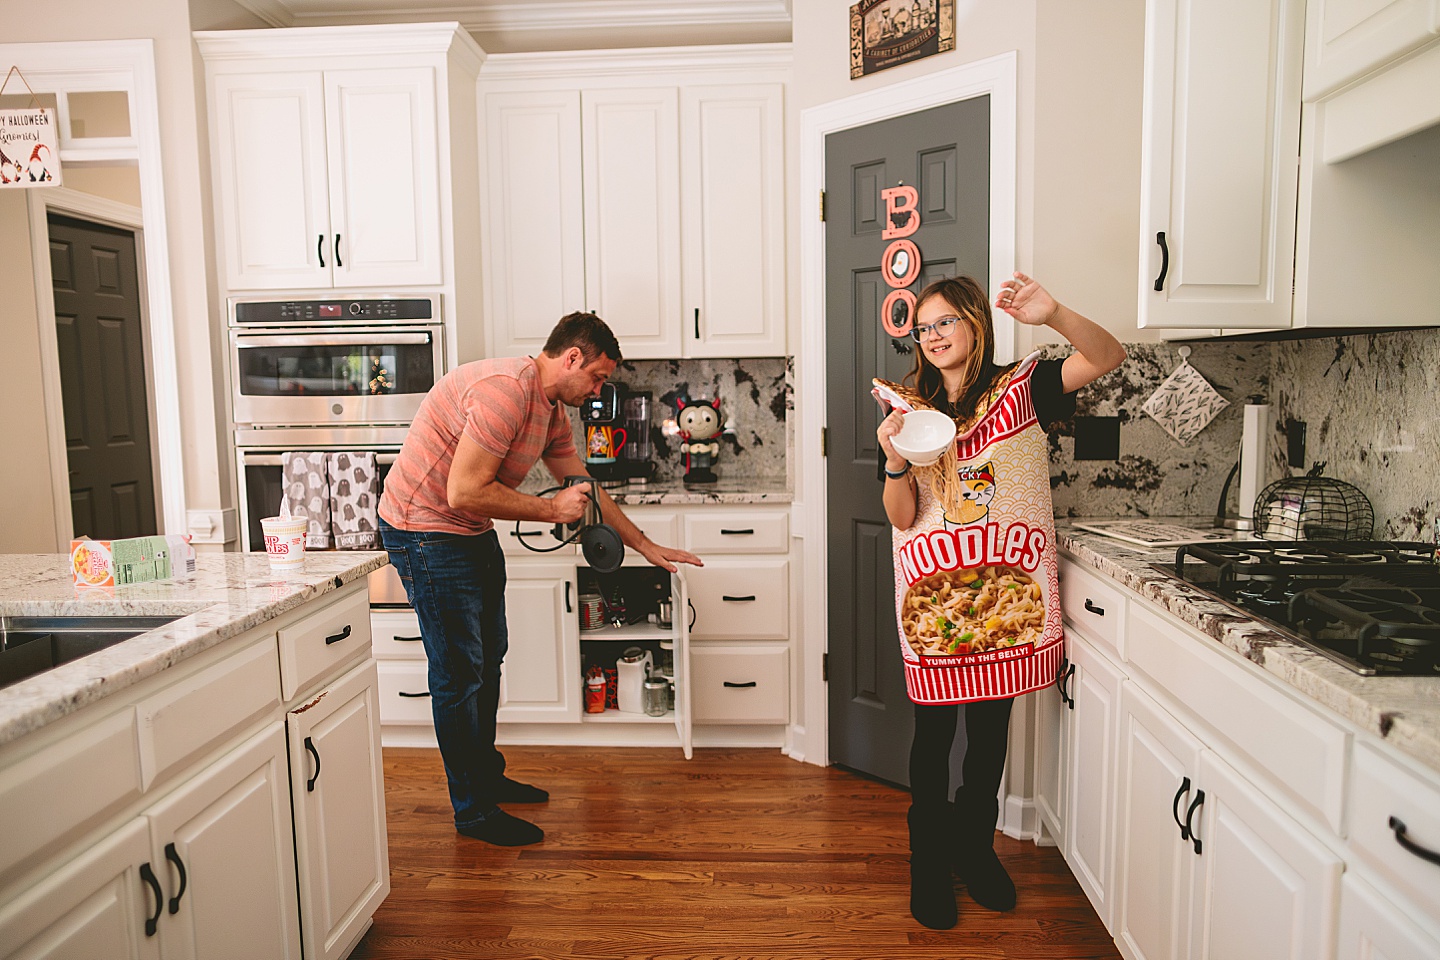 Dad puts away something in a kitchen cabinet while daughter prepares Cup o Noodles soup